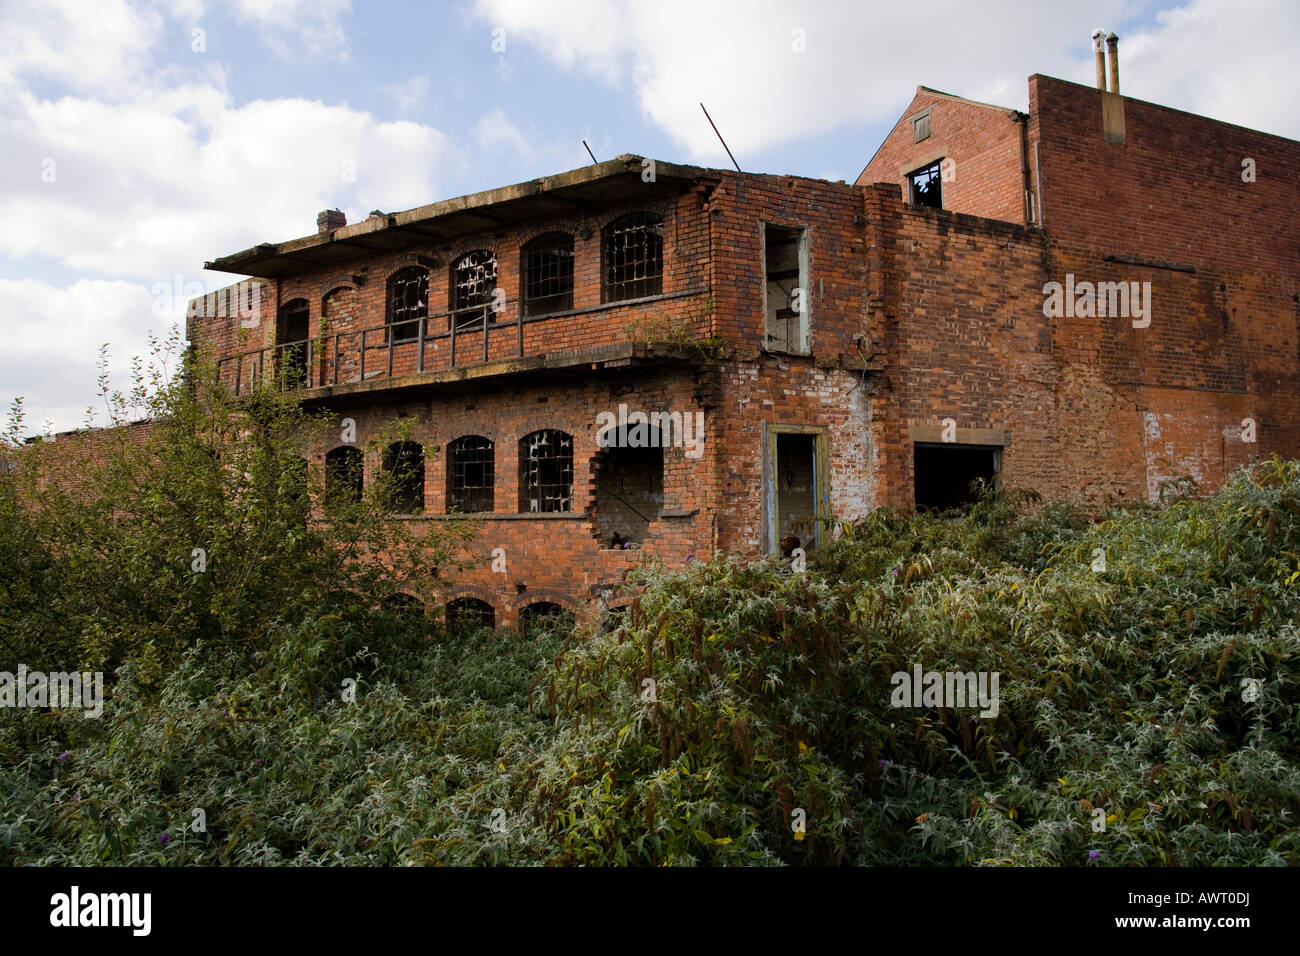 Run down once industrial building left to ruin after vandals set it on fire. Legge Lane, Birmingham, 2007. Stock Photo